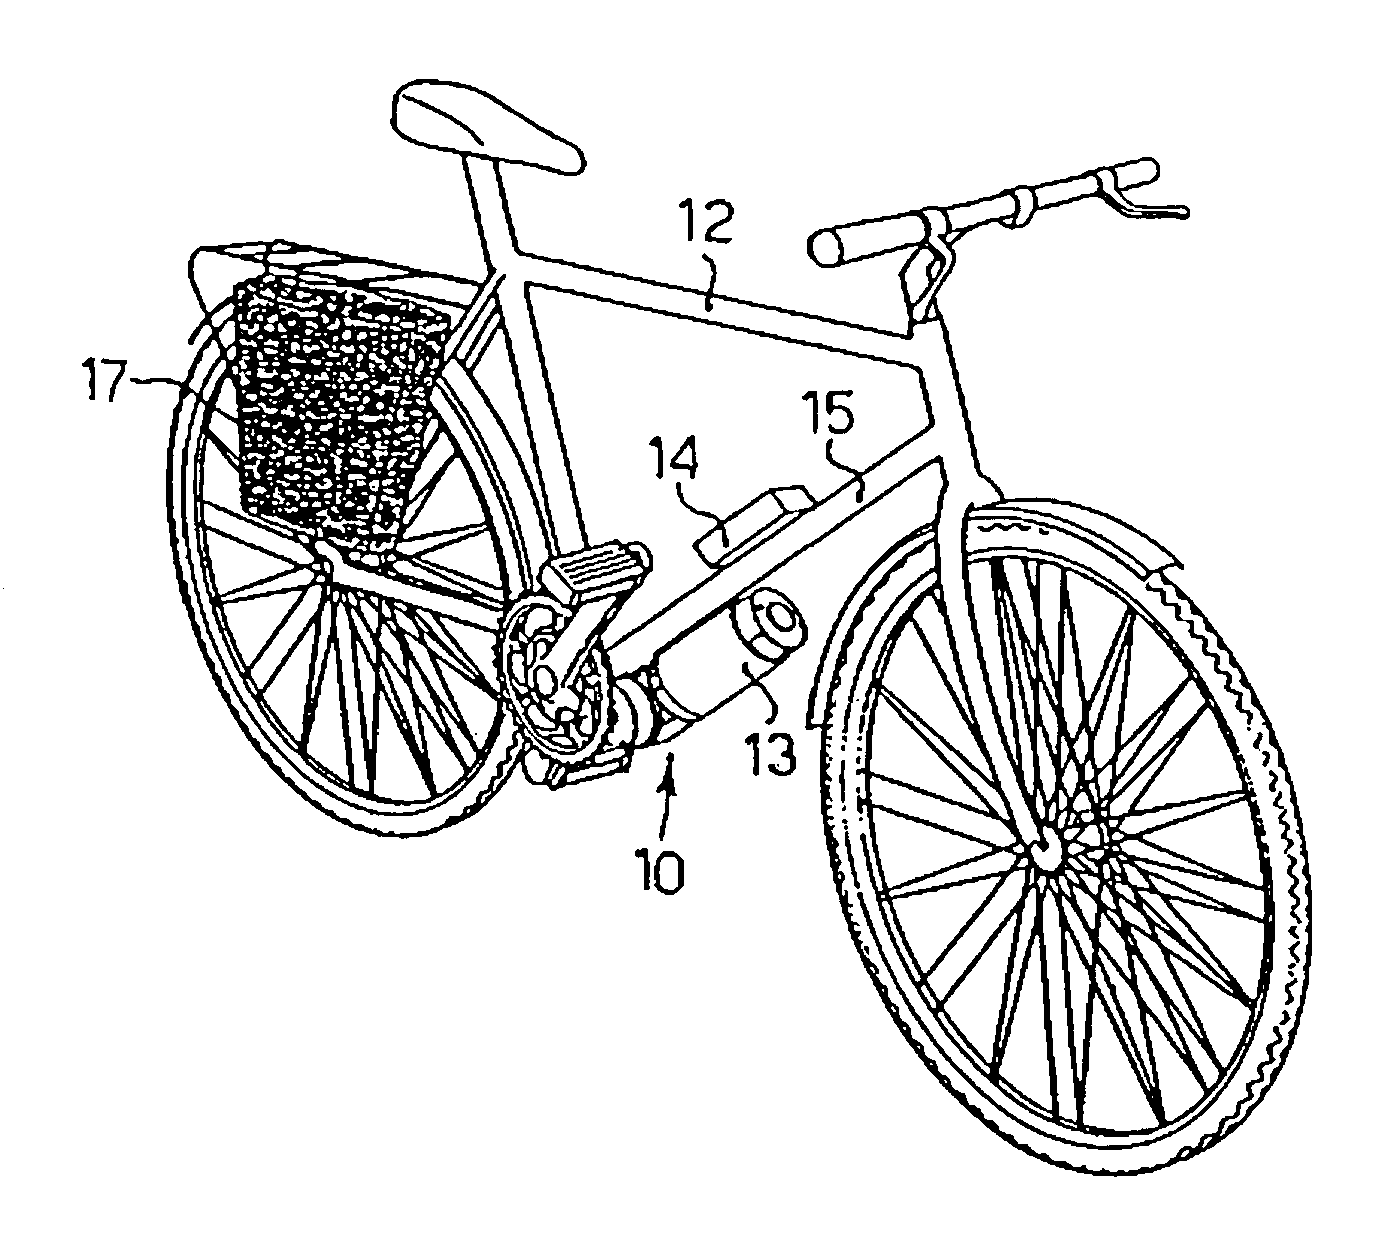 Drive unit able to be applied to a vehicle provided with pedals